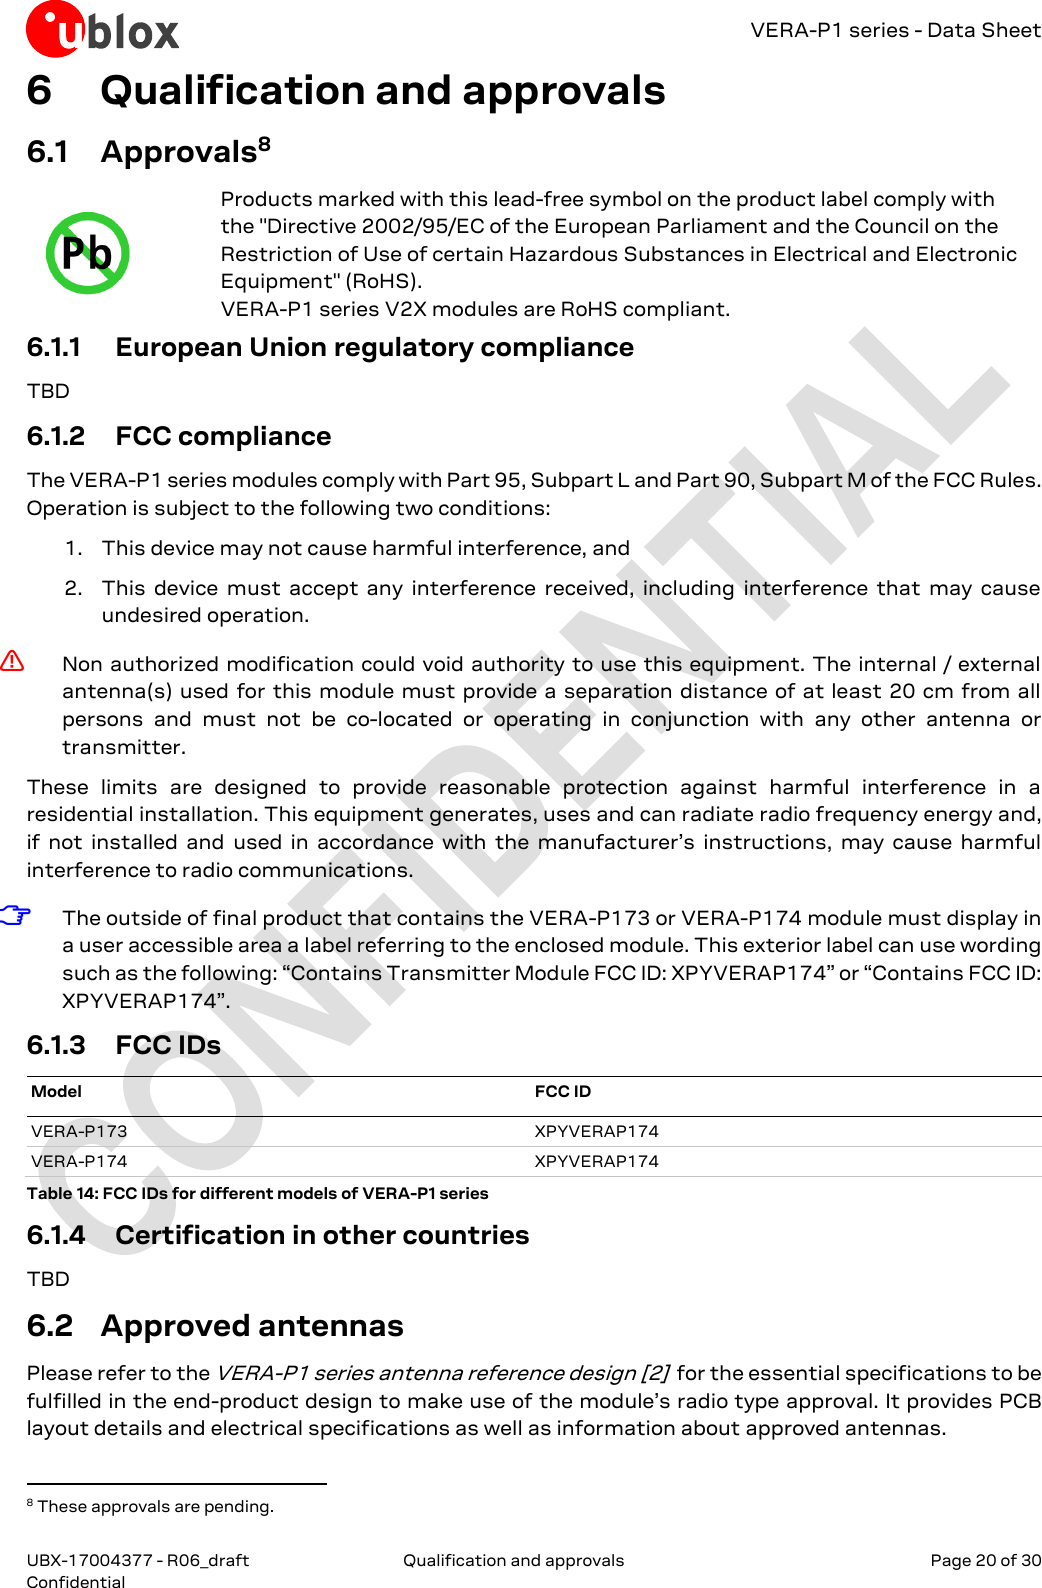 VERA-P1 series - Data Sheet UBX-17004377 - R06_draft  Qualification and approvals   Page 20 of 30 Confidential     6 Qualification and approvals 6.1 Approvals8  Products marked with this lead-free symbol on the product label comply with the &quot;Directive 2002/95/EC of the European Parliament and the Council on the Restriction of Use of certain Hazardous Substances in Electrical and Electronic Equipment&quot; (RoHS). VERA-P1 series V2X modules are RoHS compliant. 6.1.1 European Union regulatory compliance TBD 6.1.2 FCC compliance The VERA-P1 series modules comply with Part 95, Subpart L and Part 90, Subpart M of the FCC Rules. Operation is subject to the following two conditions: 1. This device may not cause harmful interference, and 2. This  device  must  accept  any  interference  received,  including  interference  that  may  cause undesired operation. ⚠ Non authorized modification could void authority to use this equipment. The internal / external antenna(s) used for this module must provide a  separation distance of at least  20 cm from all persons  and  must  not  be  co-located  or  operating  in  conjunction  with  any  other  antenna  or transmitter. These  limits  are  designed  to  provide  reasonable  protection  against  harmful  interference  in  a residential installation. This equipment generates, uses and can radiate radio frequency energy and, if  not  installed  and  used  in  accordance  with  the  manufacturer’s  instructions,  may  cause  harmful interference to radio communications. ☞ The outside of final product that contains the VERA-P173 or VERA-P174 module must display in a user accessible area a label referring to the enclosed module. This exterior label can use wording such as the following: “Contains Transmitter Module FCC ID: XPYVERAP174” or “Contains FCC ID: XPYVERAP174”. 6.1.3 FCC IDs Model FCC ID VERA-P173 XPYVERAP174 VERA-P174 XPYVERAP174 Table 14: FCC IDs for different models of VERA-P1 series 6.1.4 Certification in other countries TBD 6.2 Approved antennas Please refer to the VERA-P1 series antenna reference design [2]  for the essential specifications to be fulfilled in the end-product design to make use of the module’s radio type approval. It provides PCB layout details and electrical specifications as well as information about approved antennas.                                                                  8 These approvals are pending.  